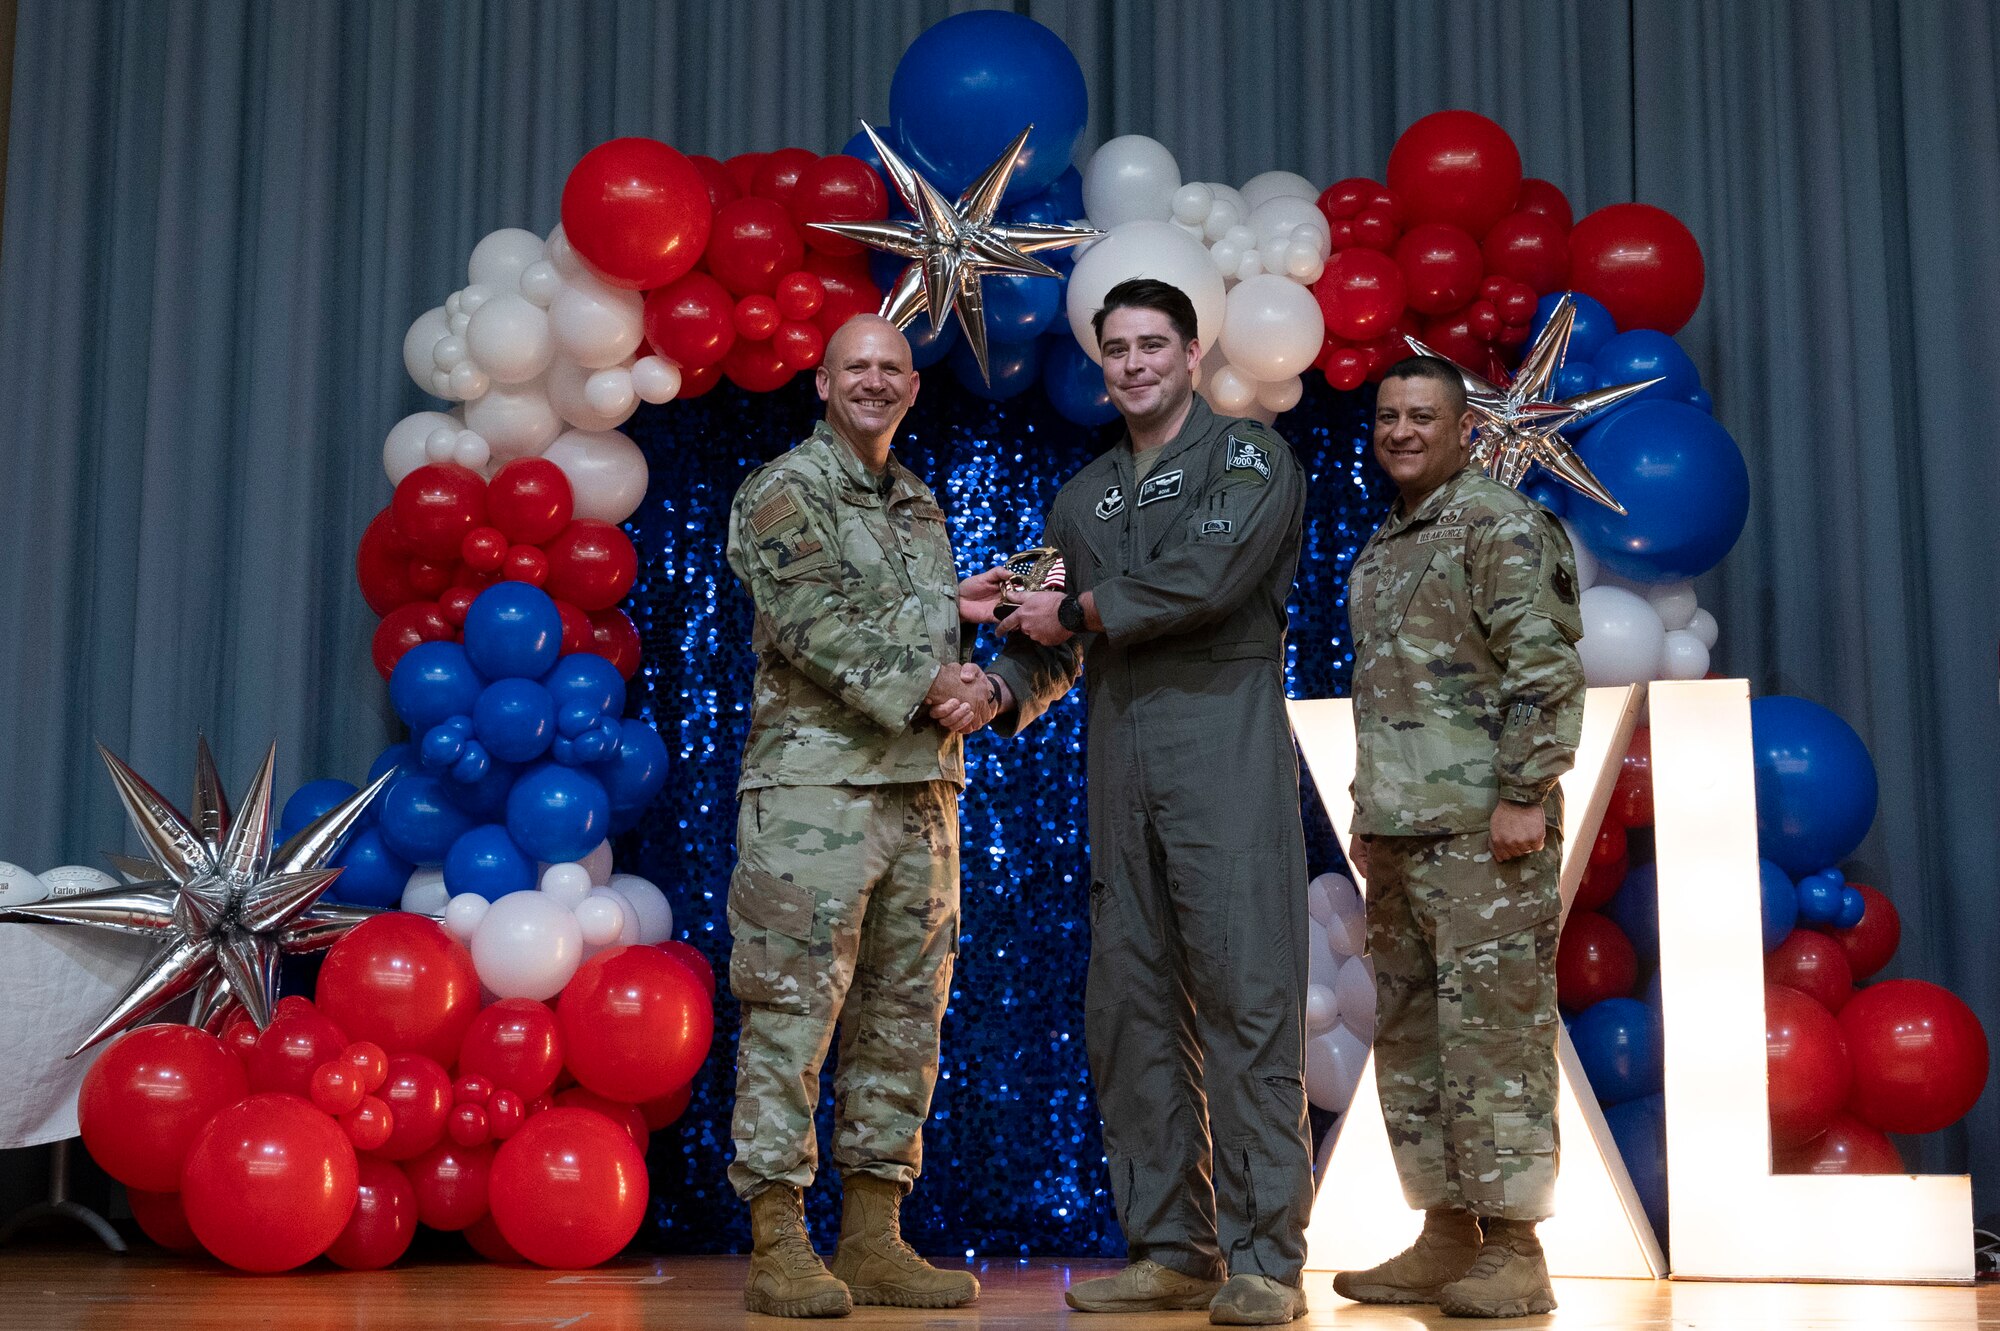 U.S. Air Force Col. Kevin Davidson, 47th Flying Training Wing (FTW) commander, and Chief Master Sgt. Lester Largaespada, 47th FTW command chief, present Capt. Patrick Clancy, 85th Flying Training Squadron, an award during the 2023 47th FTW Annual Awards Ceremony at Laughlin Air Force Base, Texas, Feb. 2, 2024. The annual awards recognized the top performers throughout the 47th Flying Training Wing during fiscal year 2023. (U.S. Air Force photo by Senior Airman Kailee Reynolds)